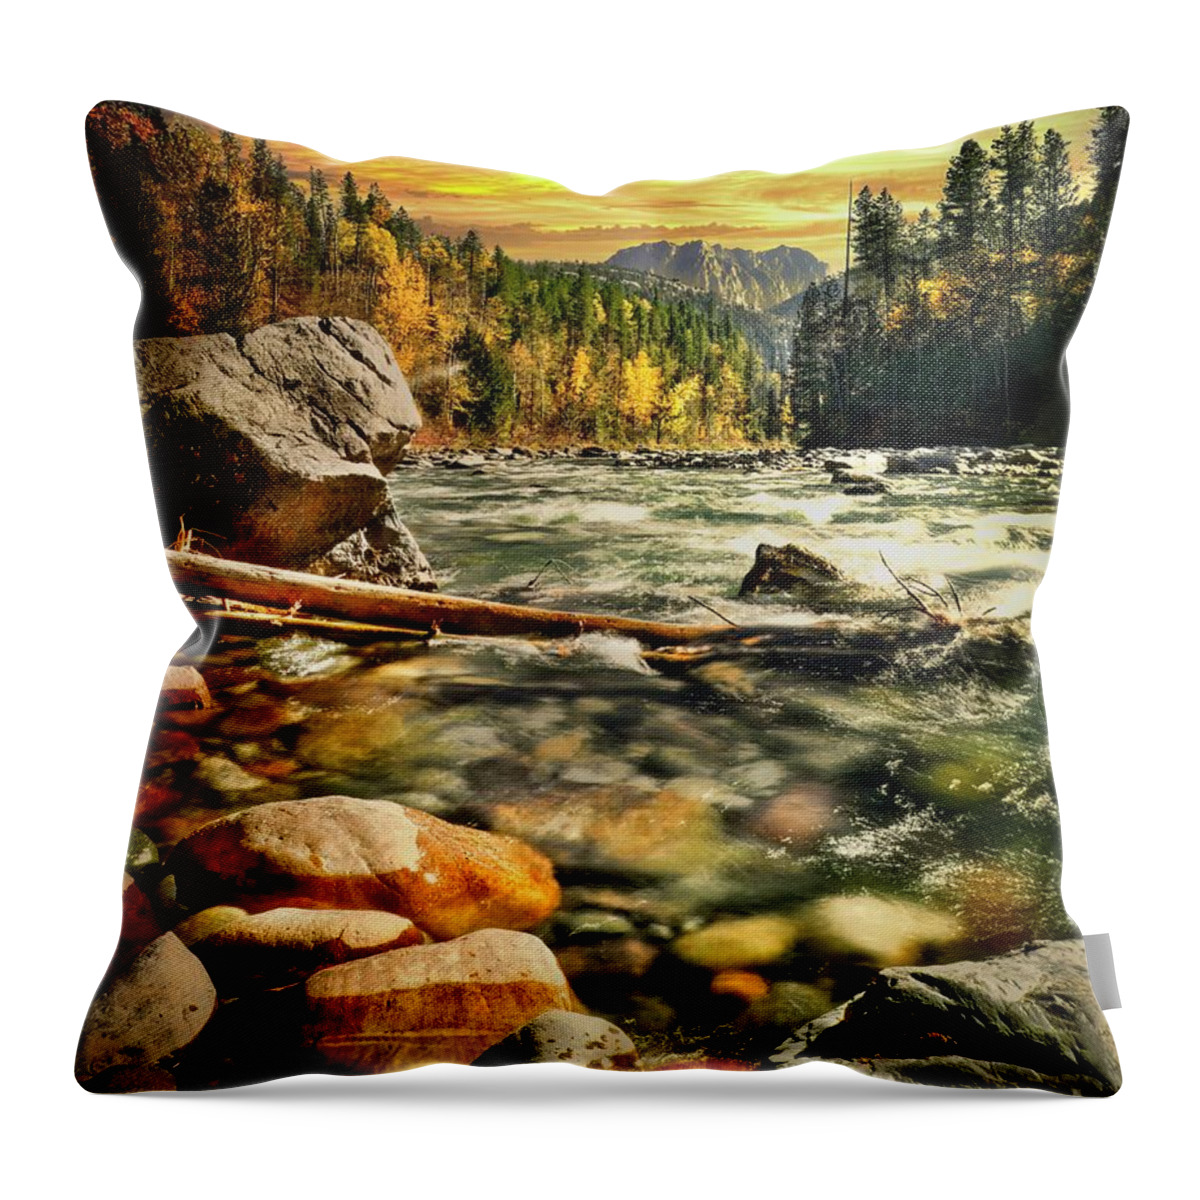 Sunset Throw Pillow featuring the photograph Rocky Mountain Sunset by Thomas Nay